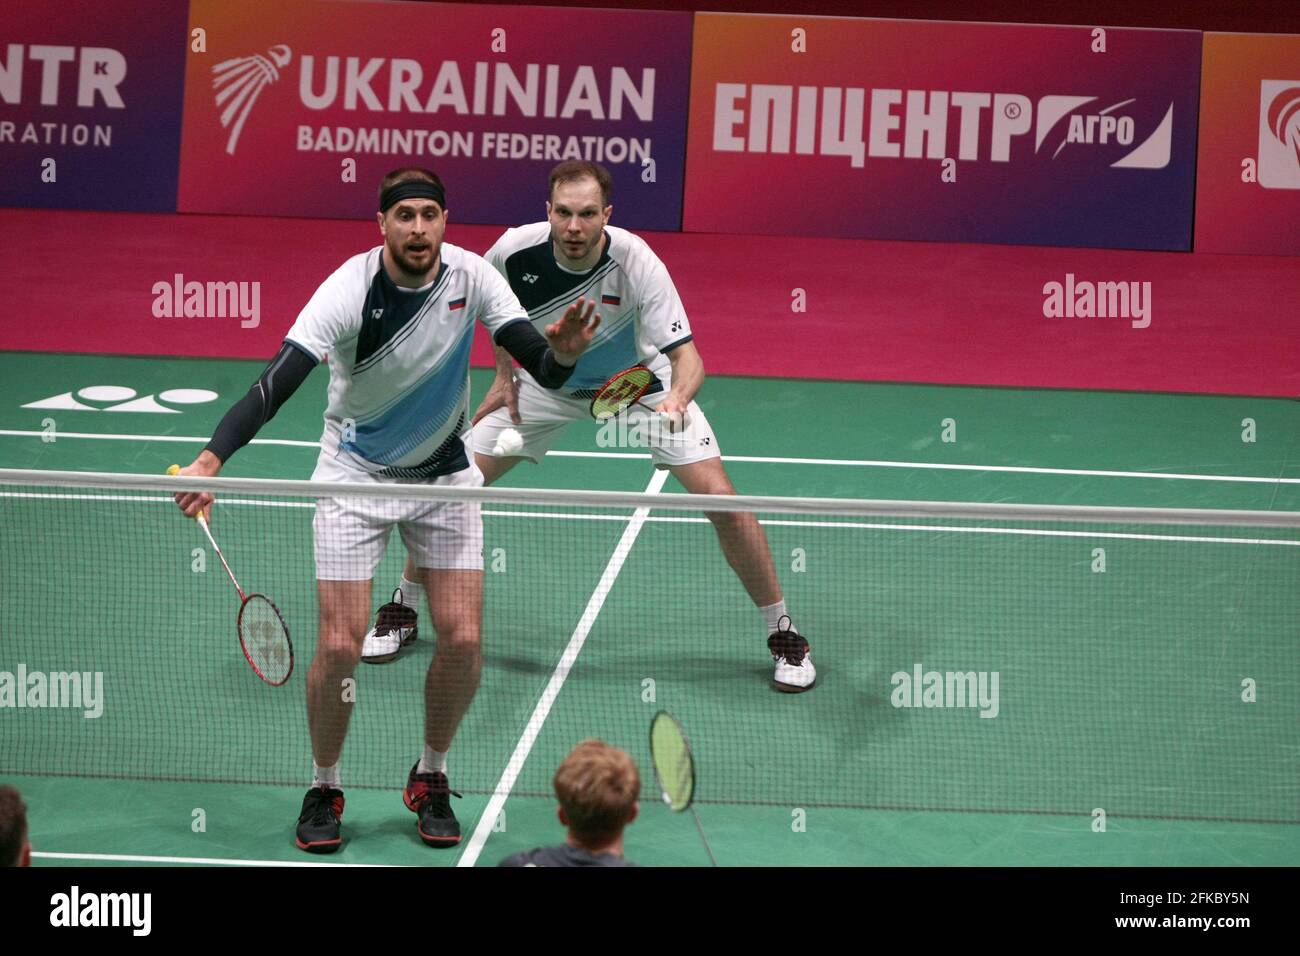 KYIV, UKRAINE - APRIL 30, 2021 - Vladimir Ivanov and Ivan Sozonov of Russia  are seen in action with Matthew Clare and Max Flynn of England during their  men's doubles quarter-final match